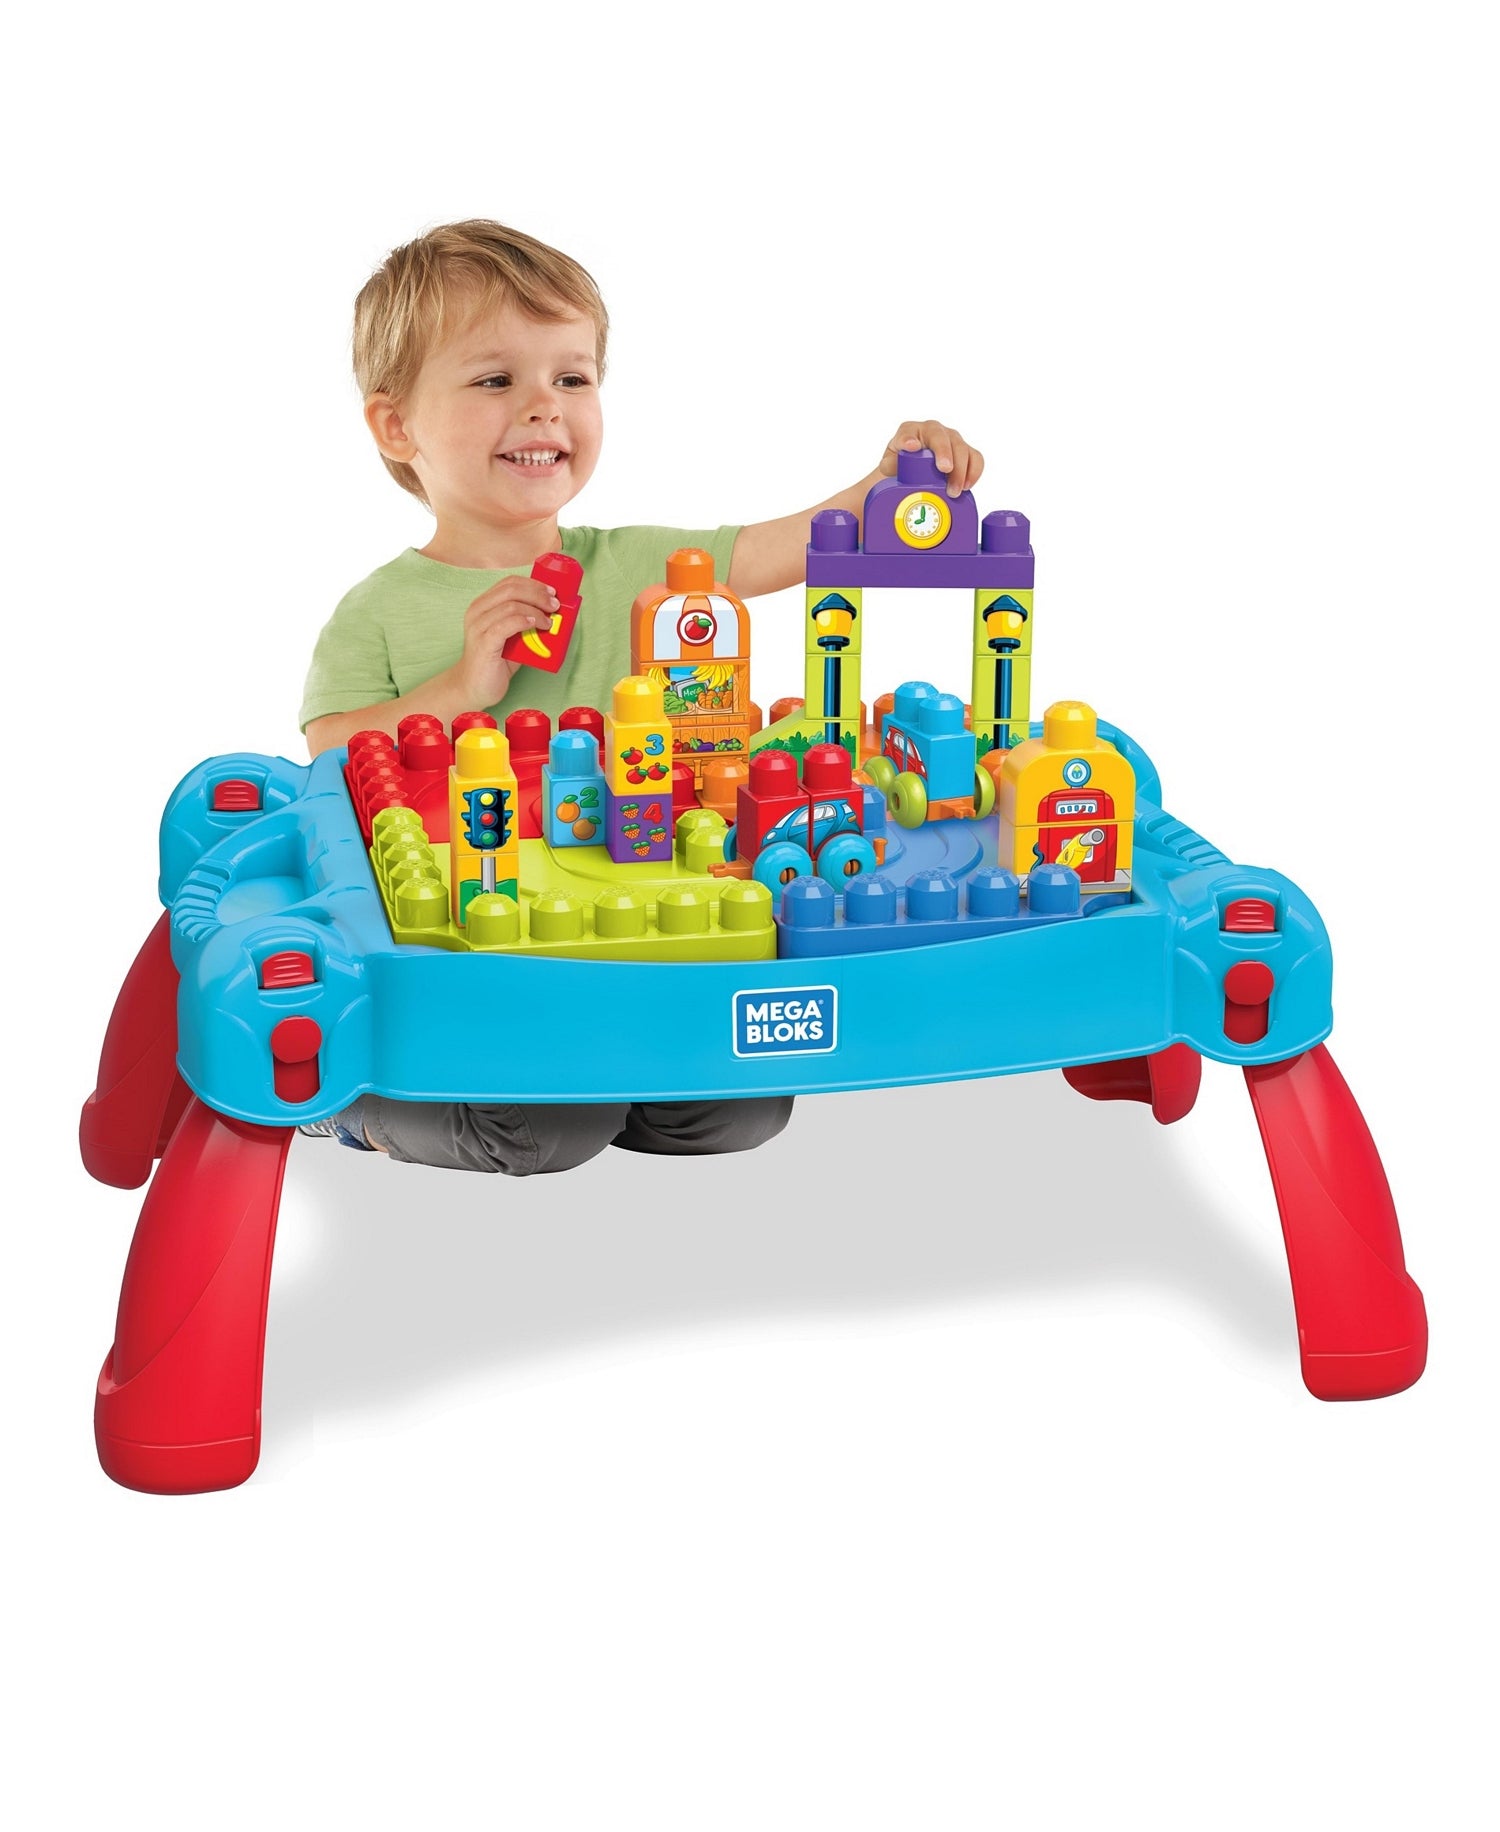 Mega Ages 1 To 5 Years Build N Learn Table With Big Building Blocks Toy Of 30 Piece Sets